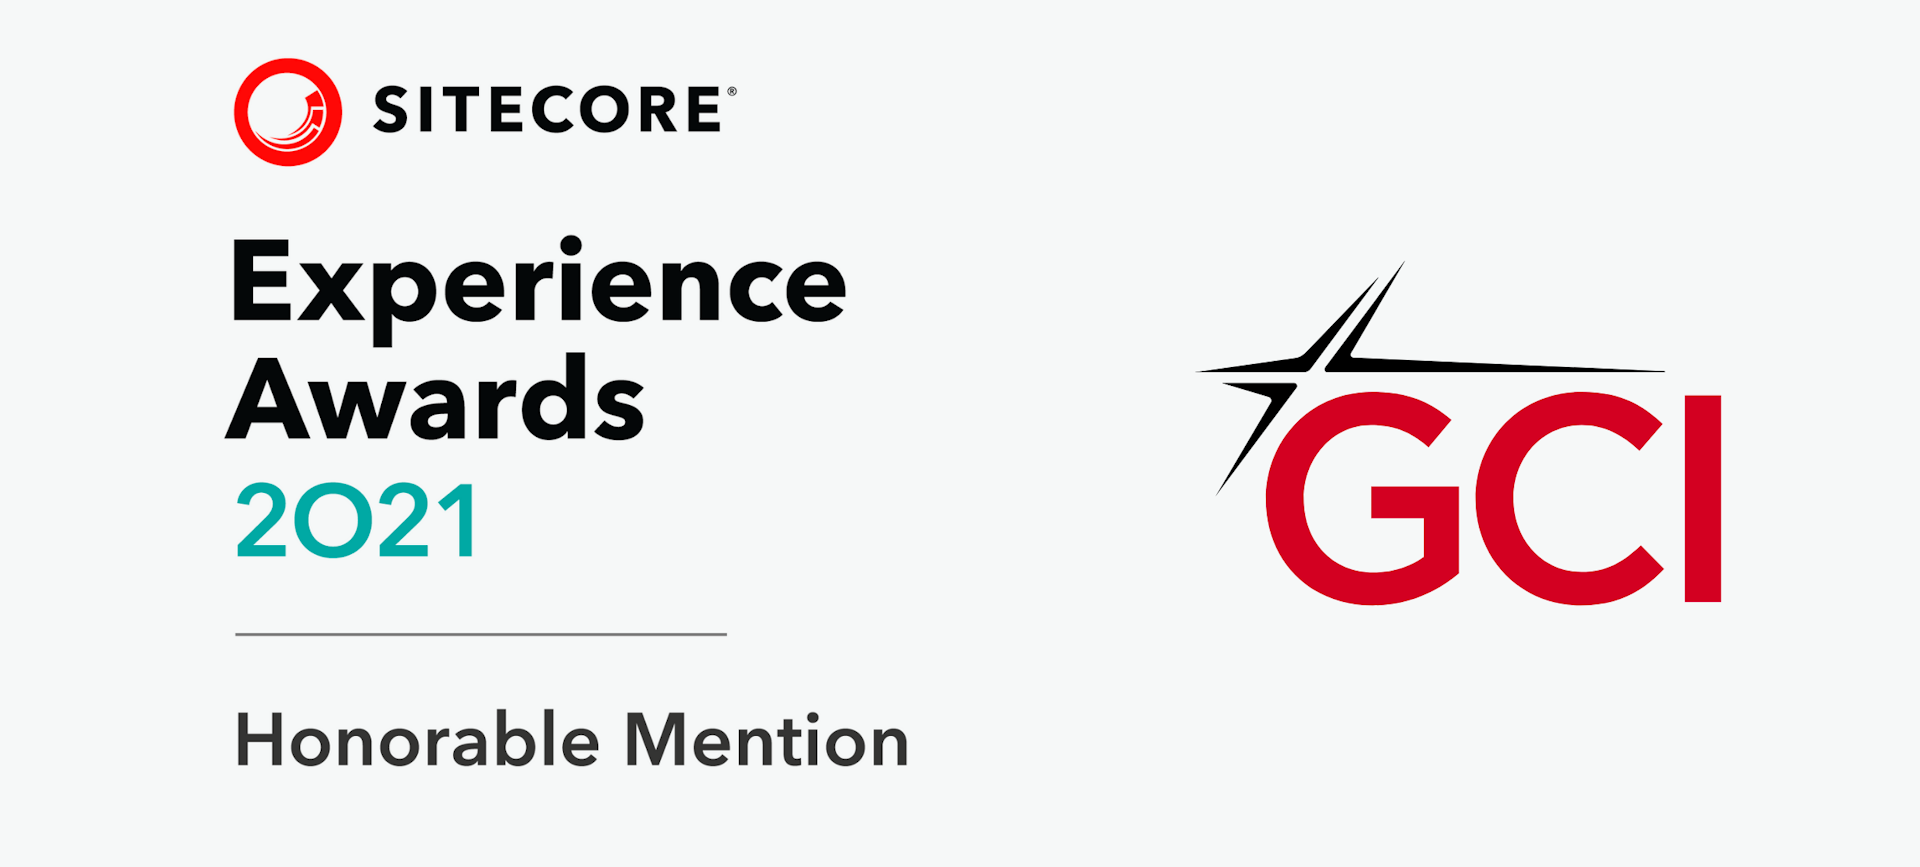 Sitecore Experience Awards 2021 Honorable Mention/GCI logo